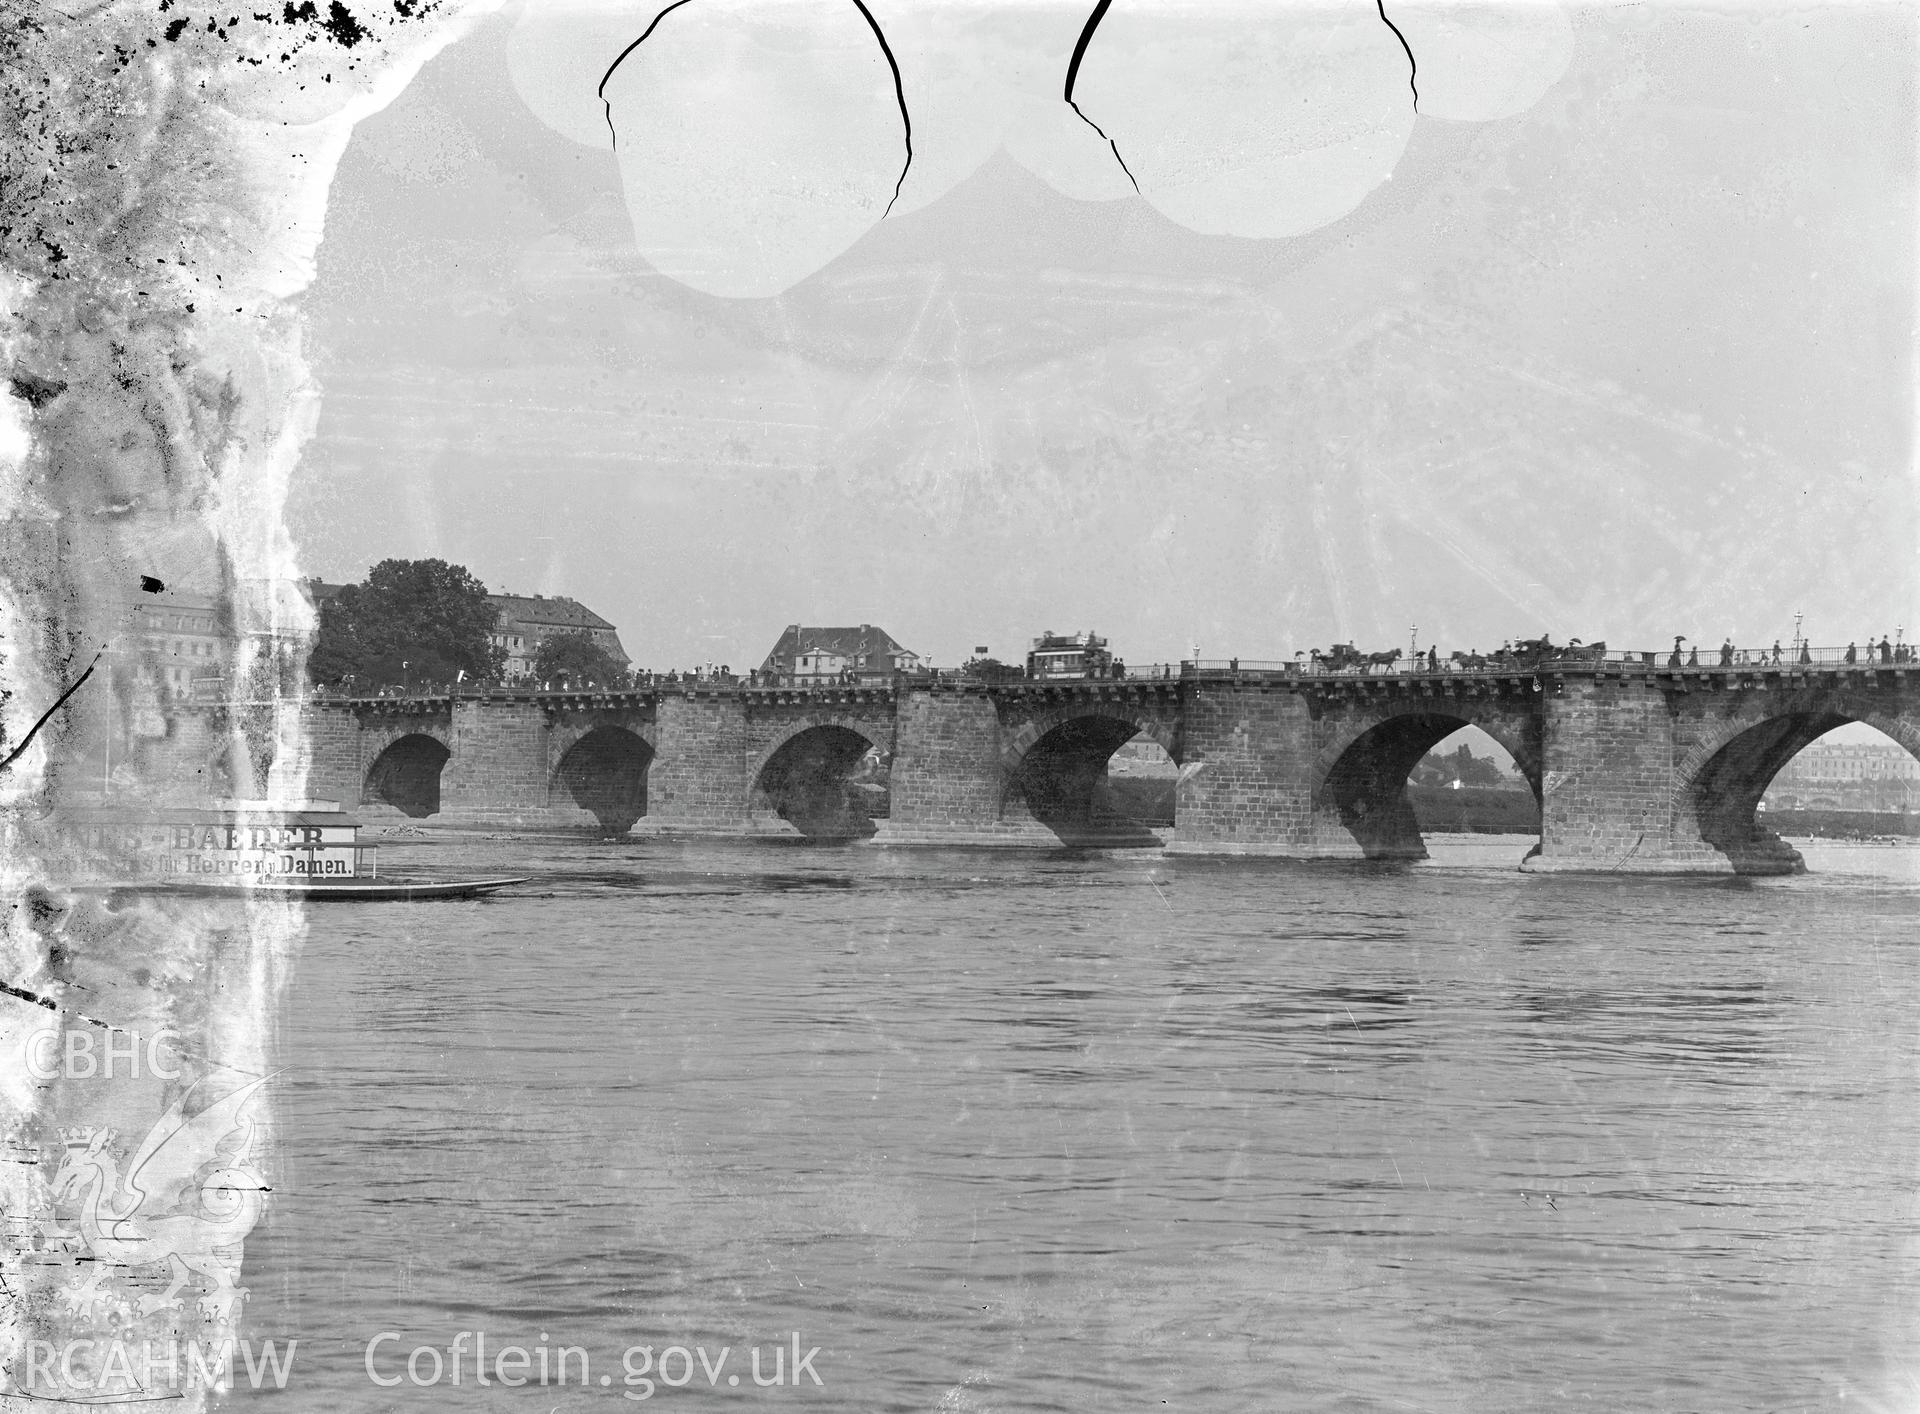 Black and white image dating from c.1910 showing an unidentified bridge in Europe, taken by Emile T. Evans.